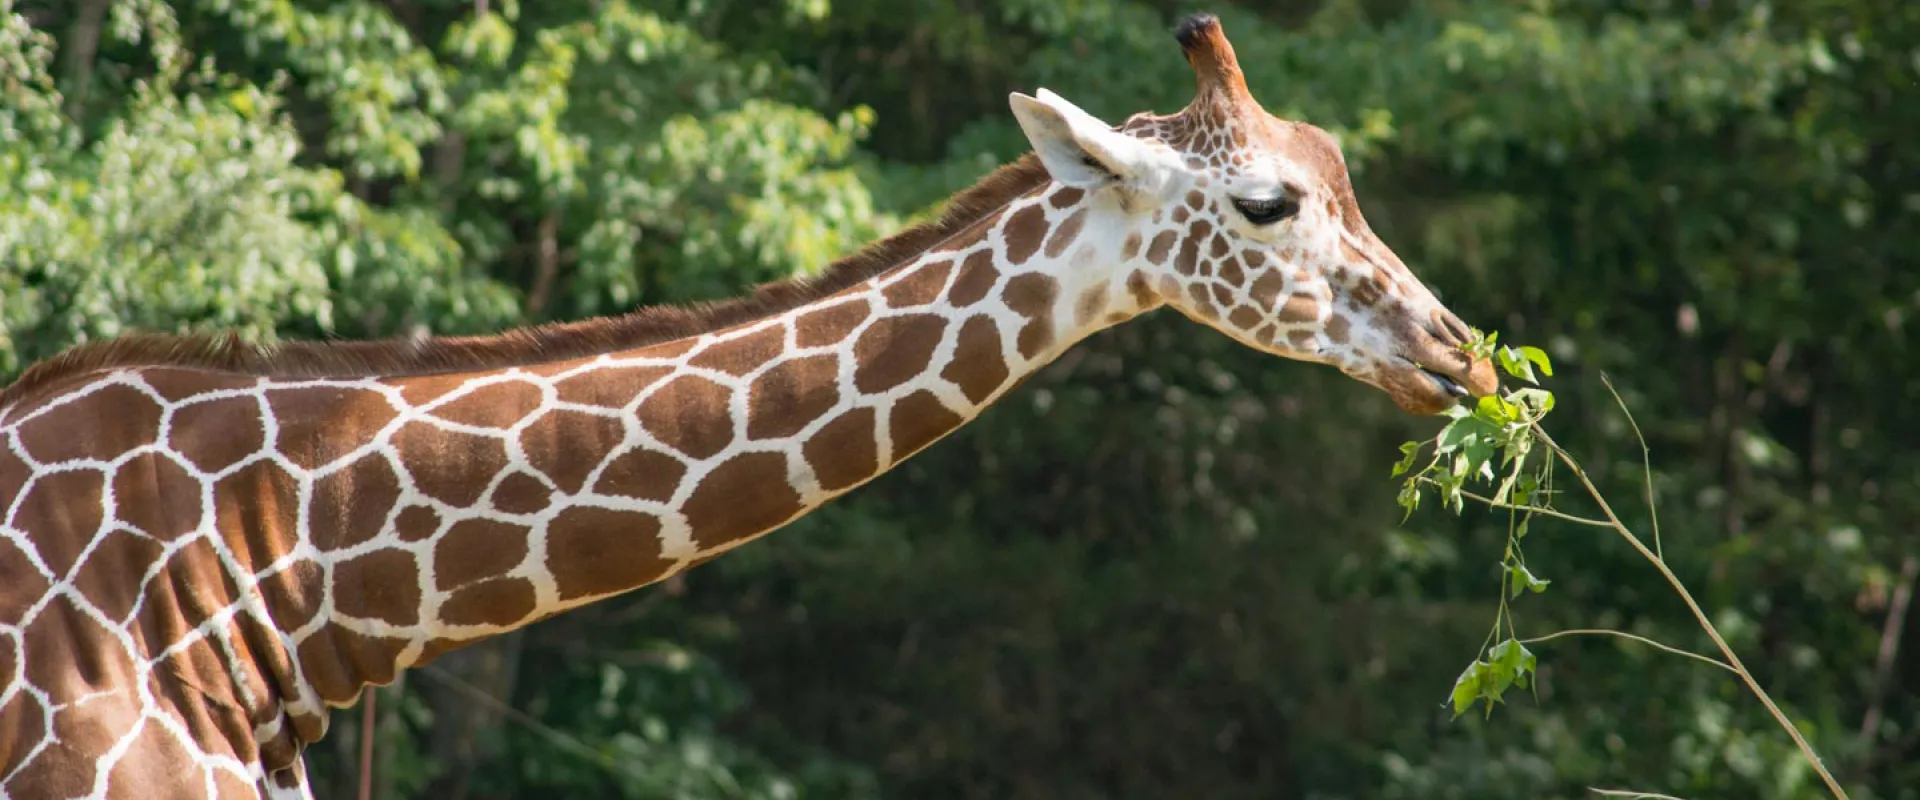 Zoo Research: Studying Our Giraffe